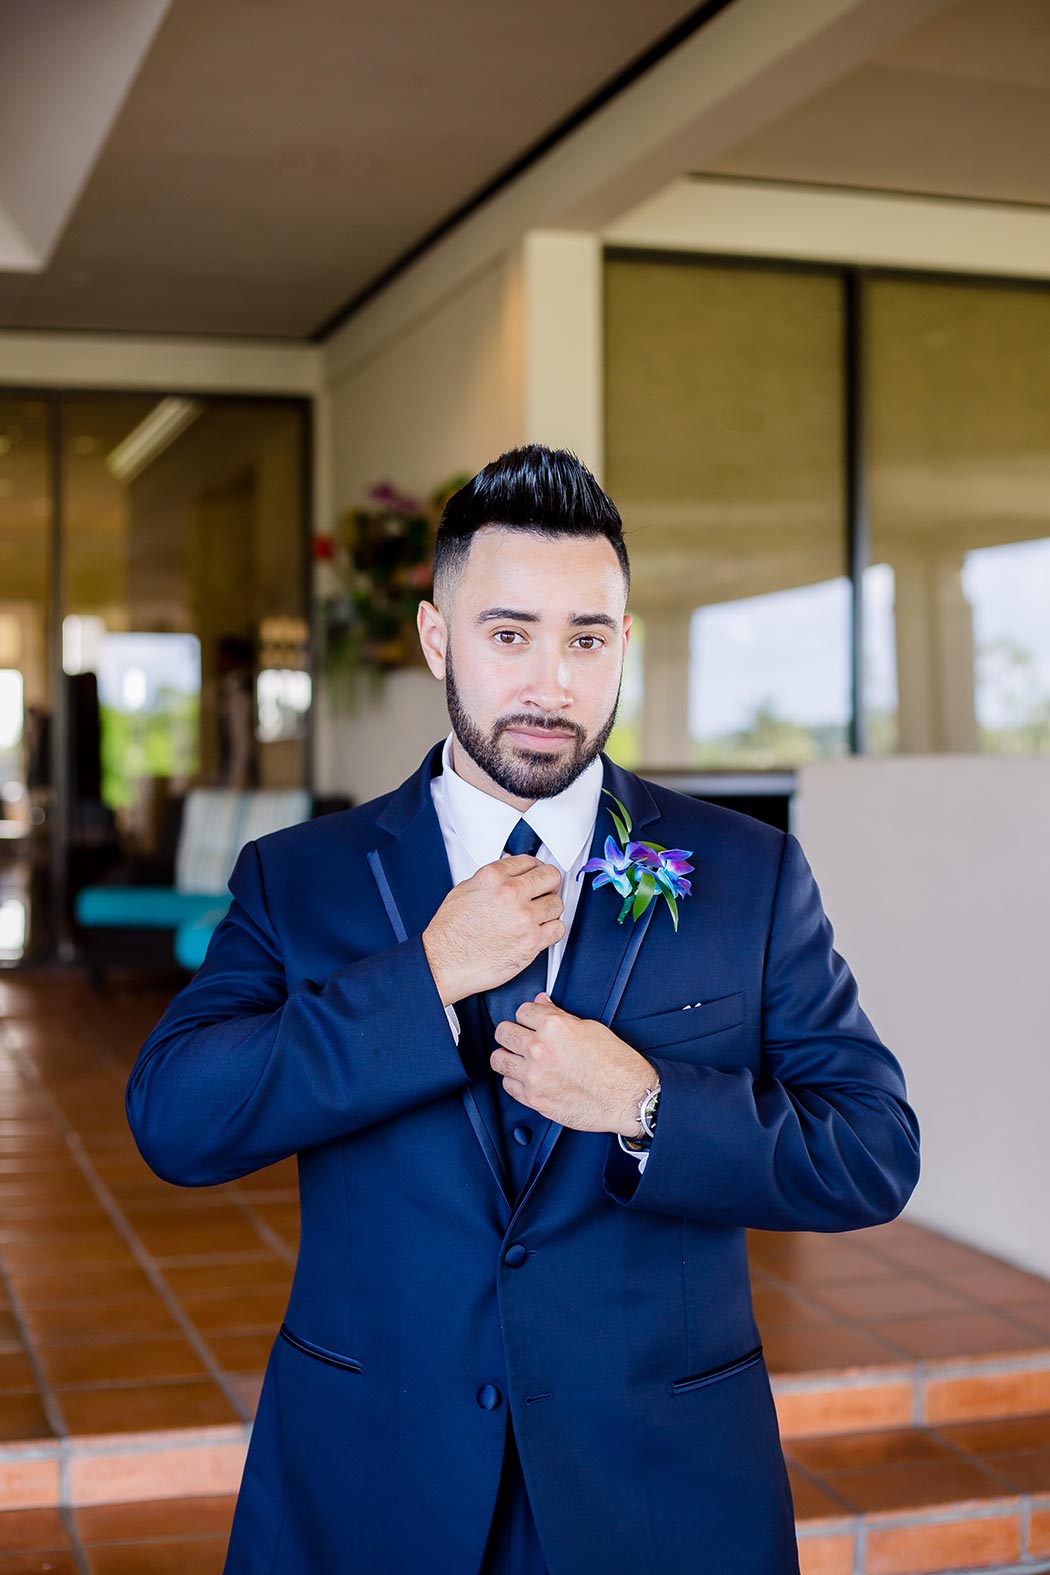 groom getting ready at breakers west country club palm beach | fort lauderdale wedding photographer | wedding photographer fort lauderdale